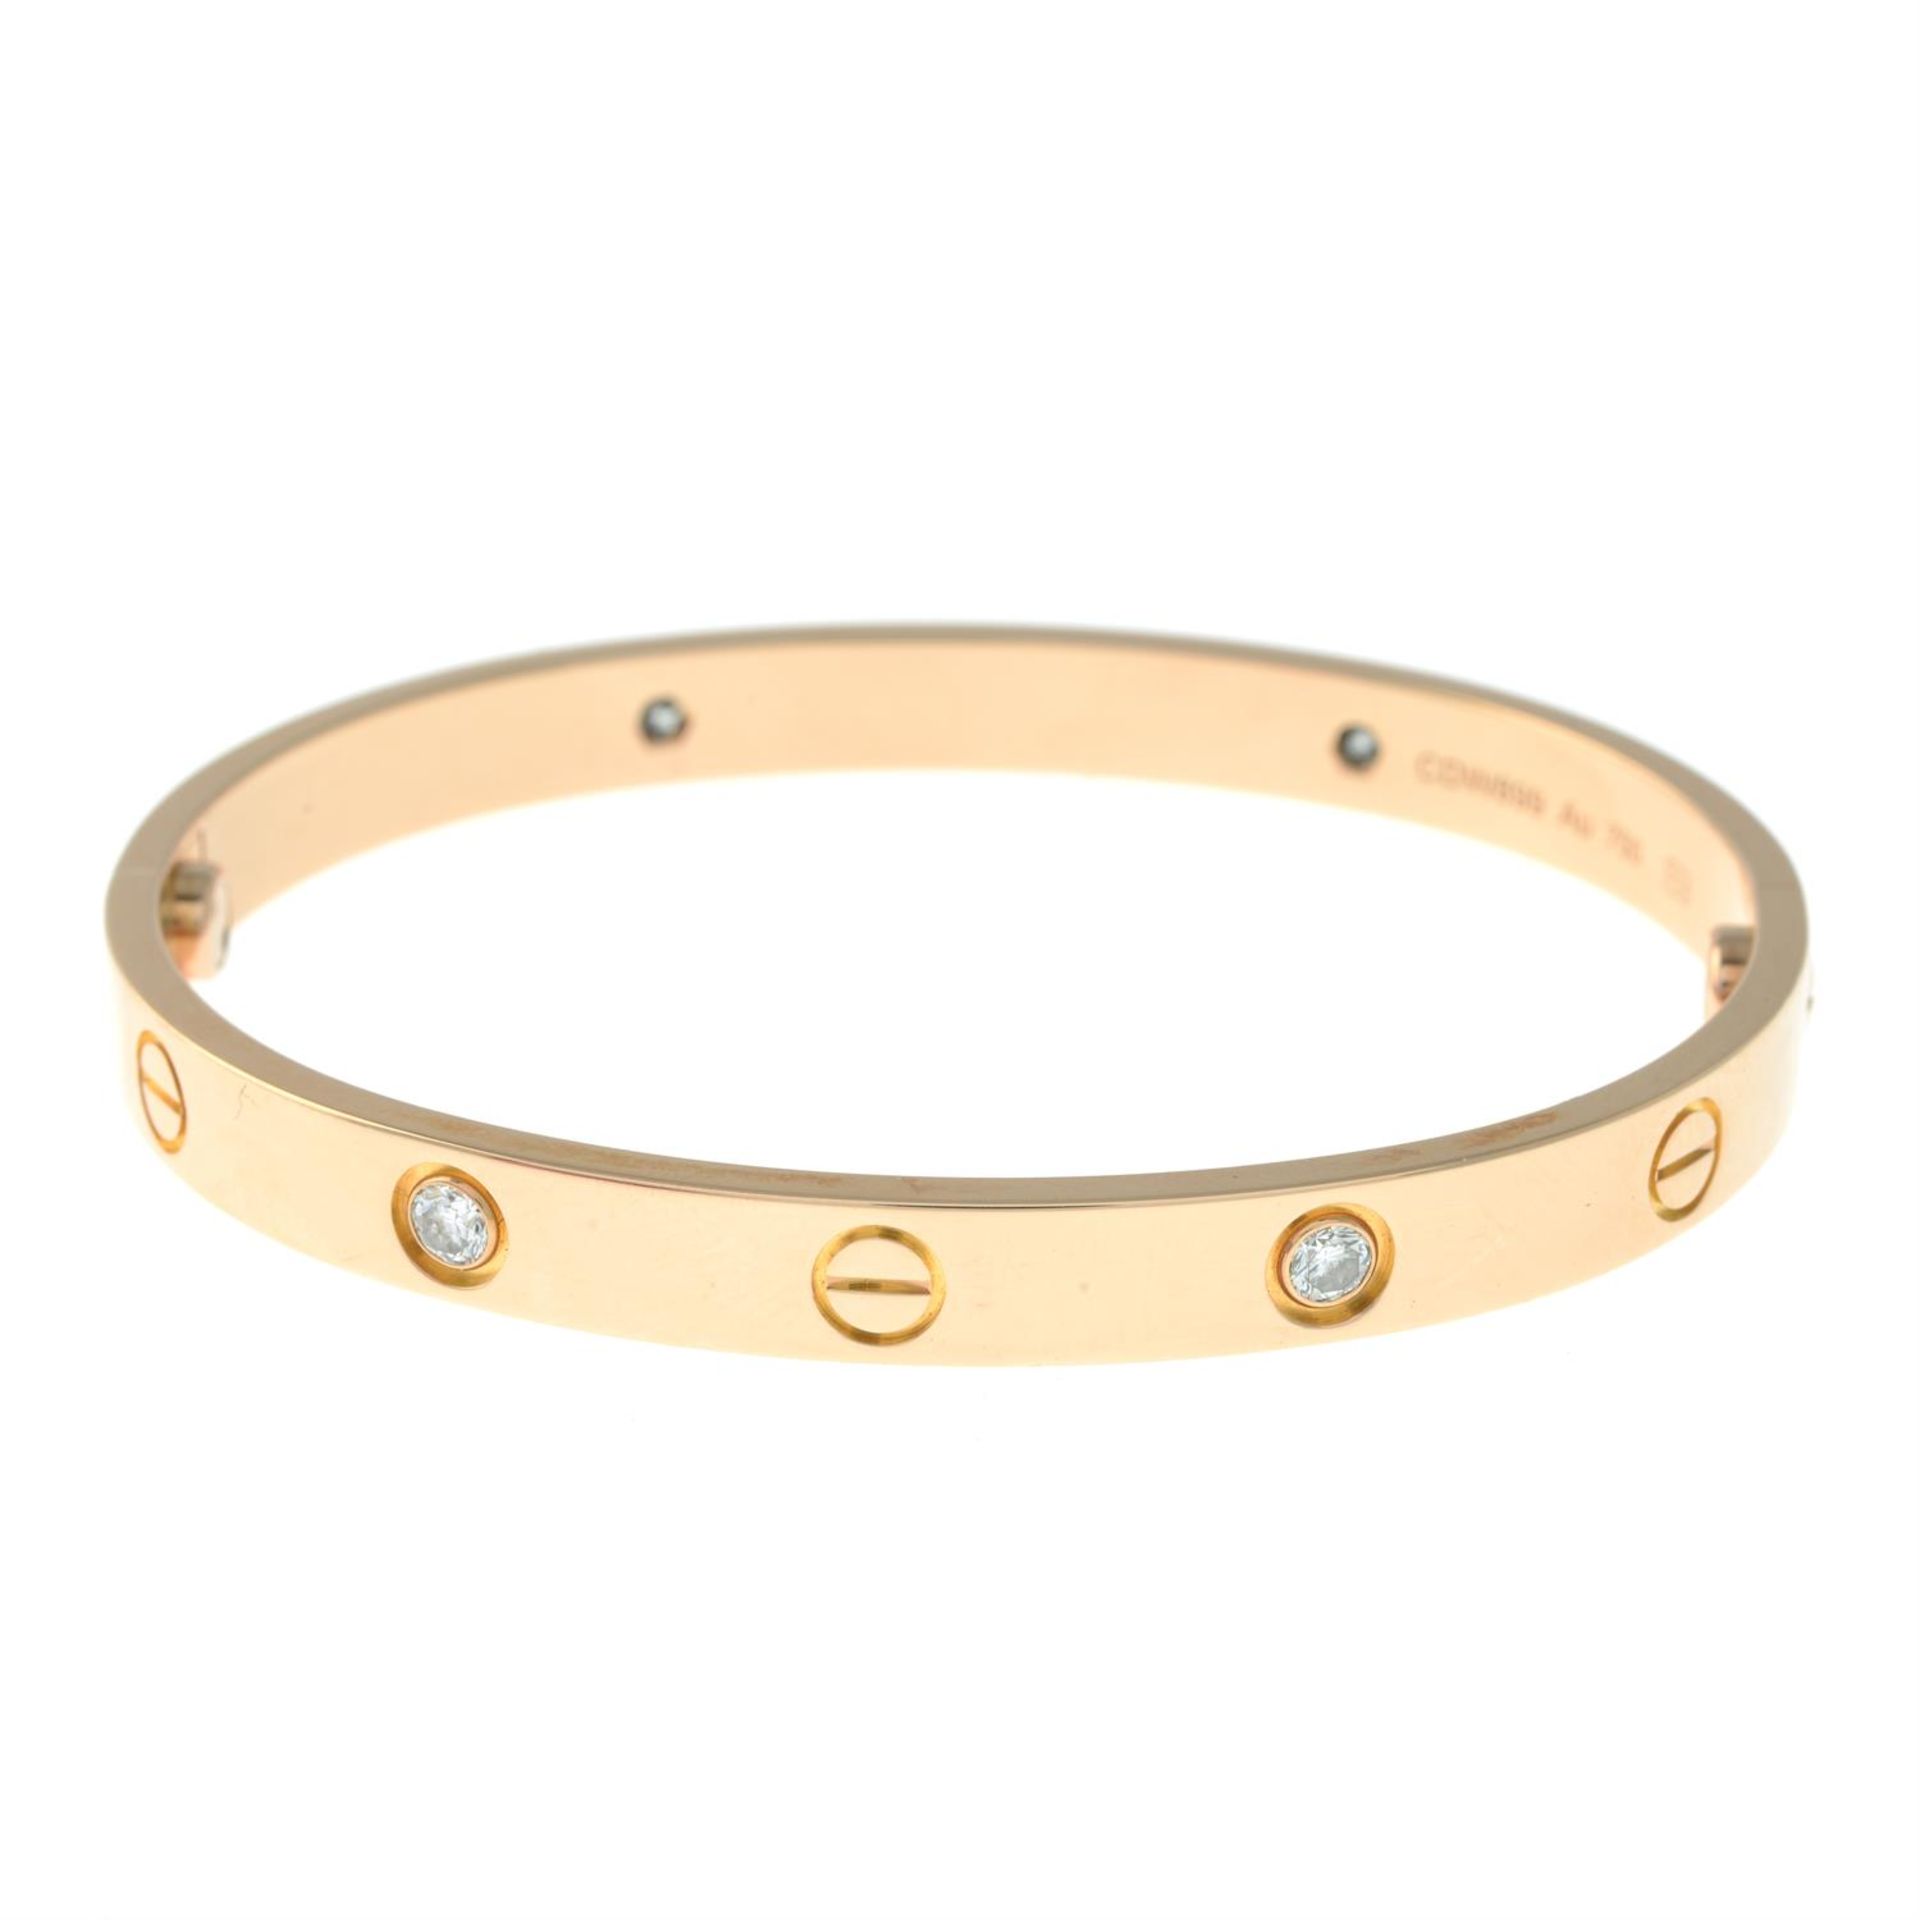 An 18ct gold brilliant-cut diamond 'Love' bangle, by Cartier. - Image 2 of 4